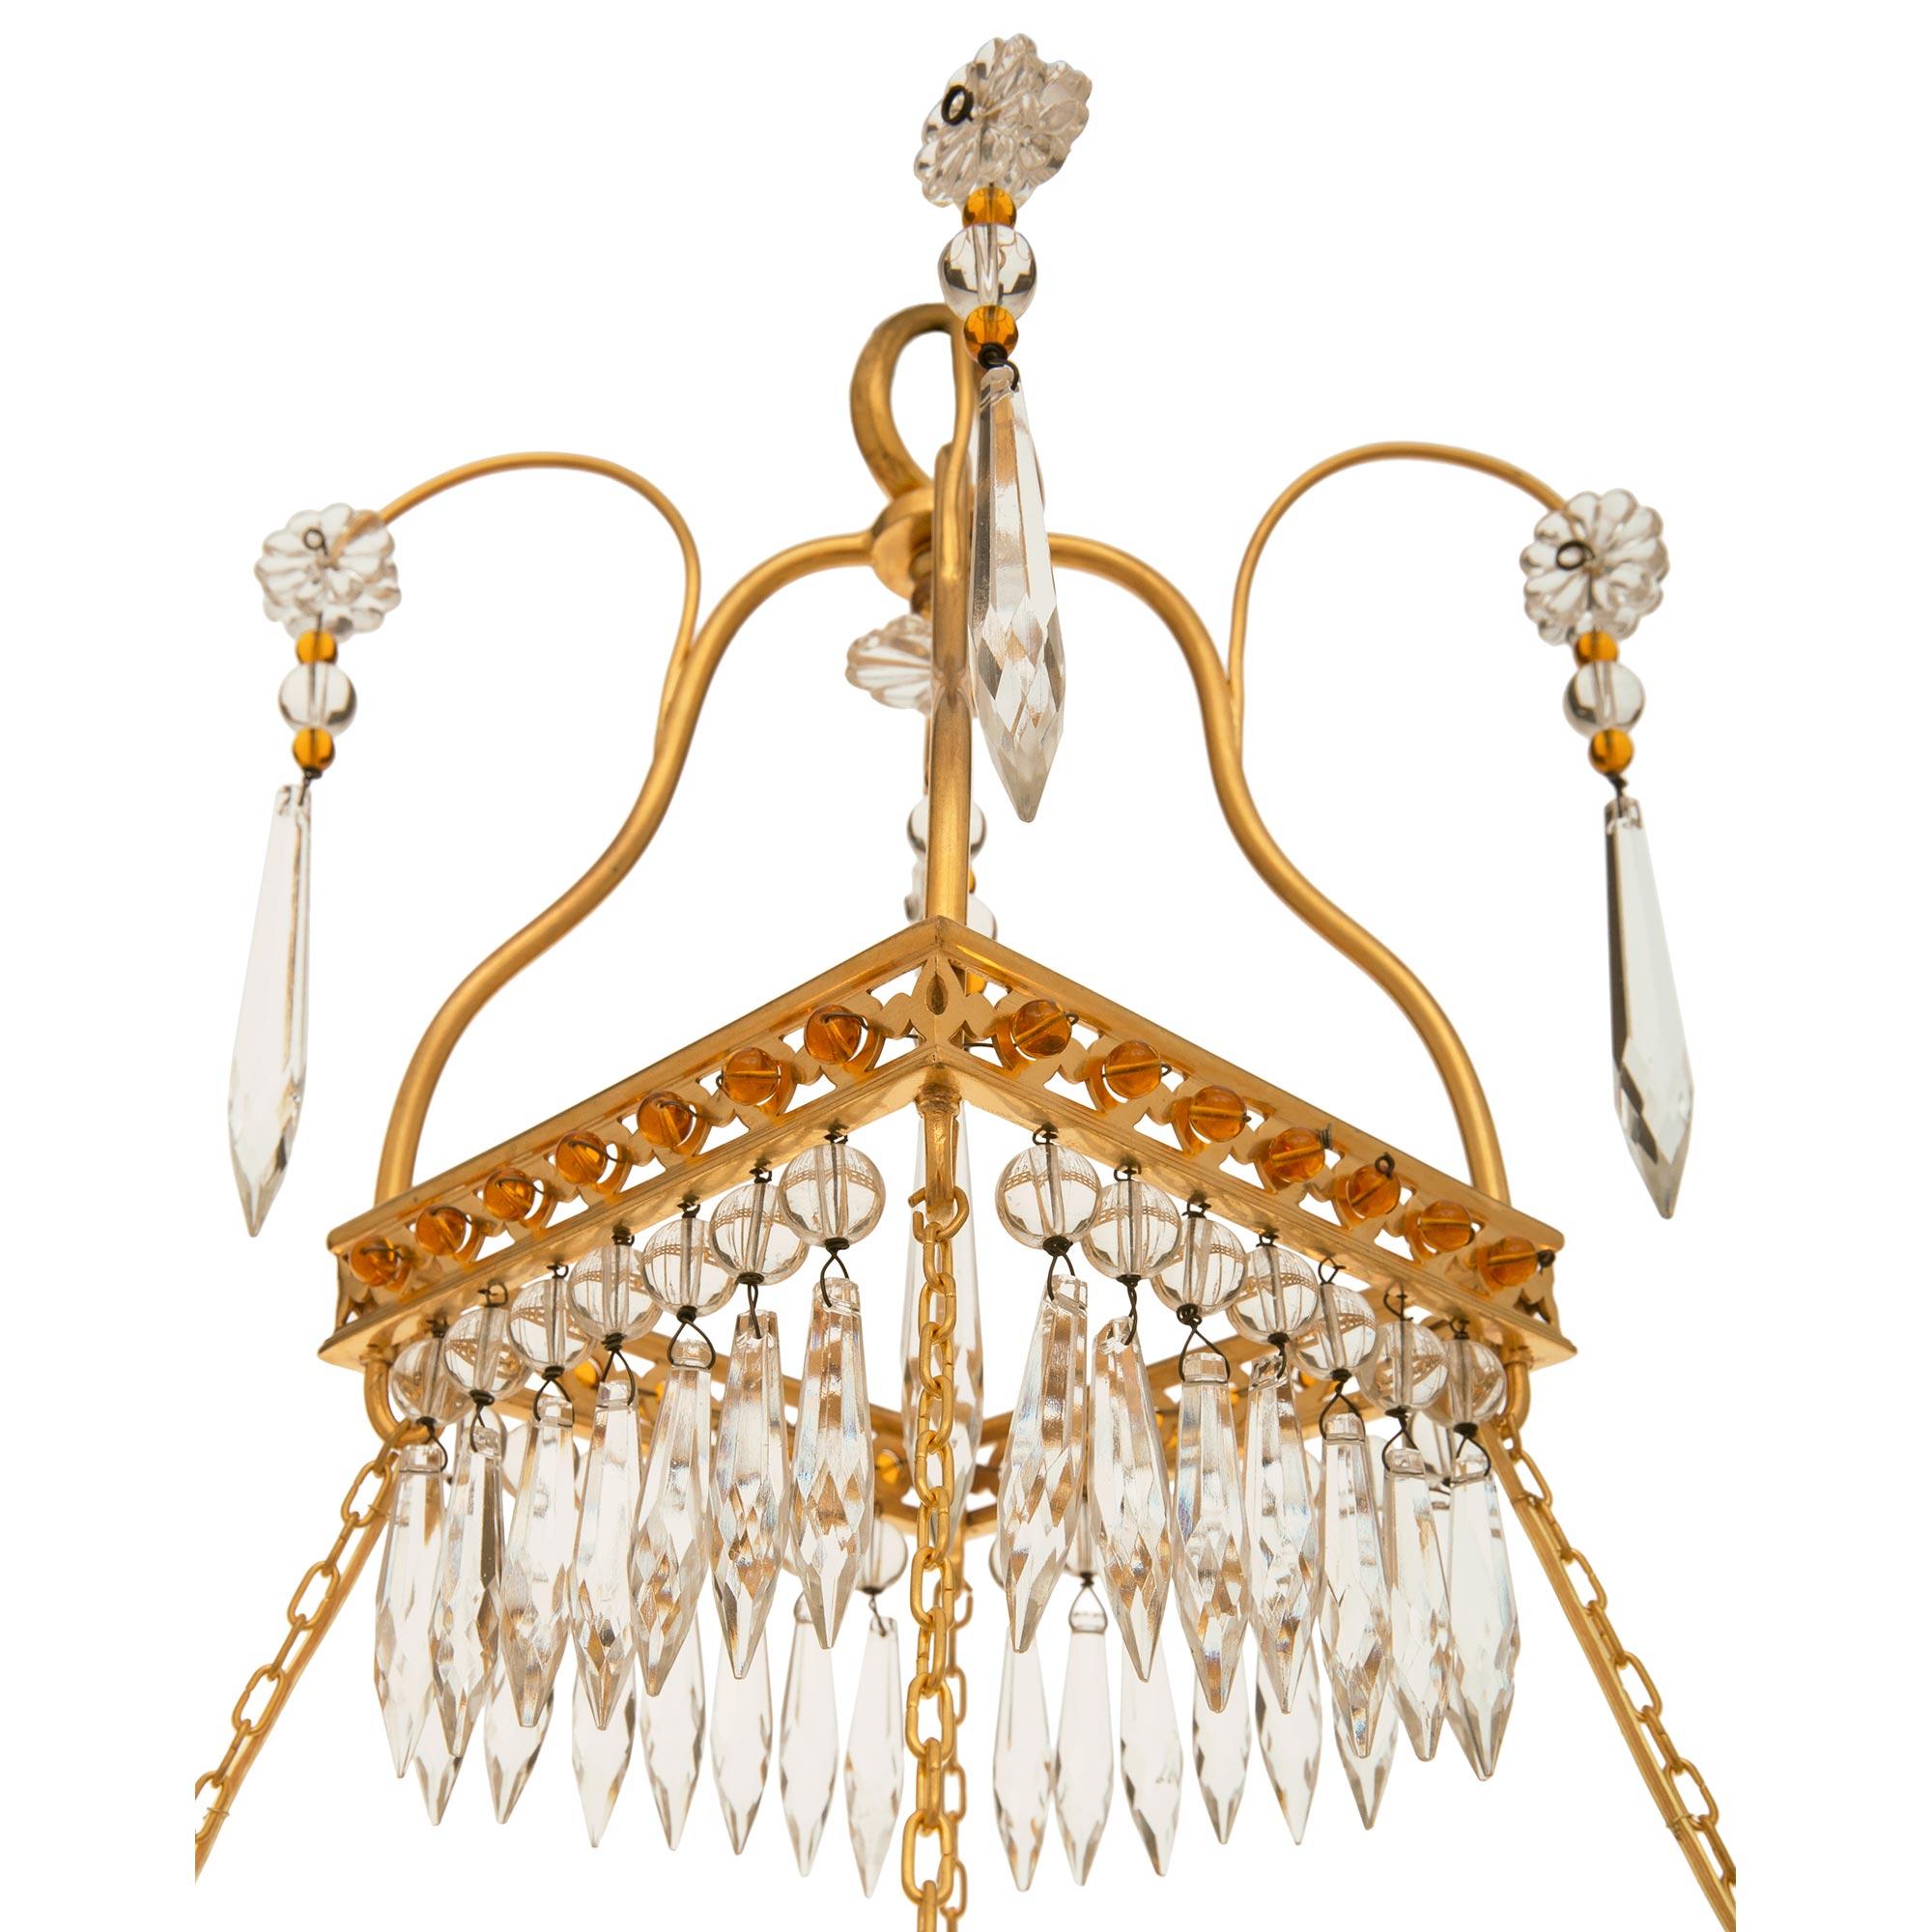 Baltic 19th Century Neo-Classical St. Ormolu And Crystal Chandelier In Good Condition For Sale In West Palm Beach, FL